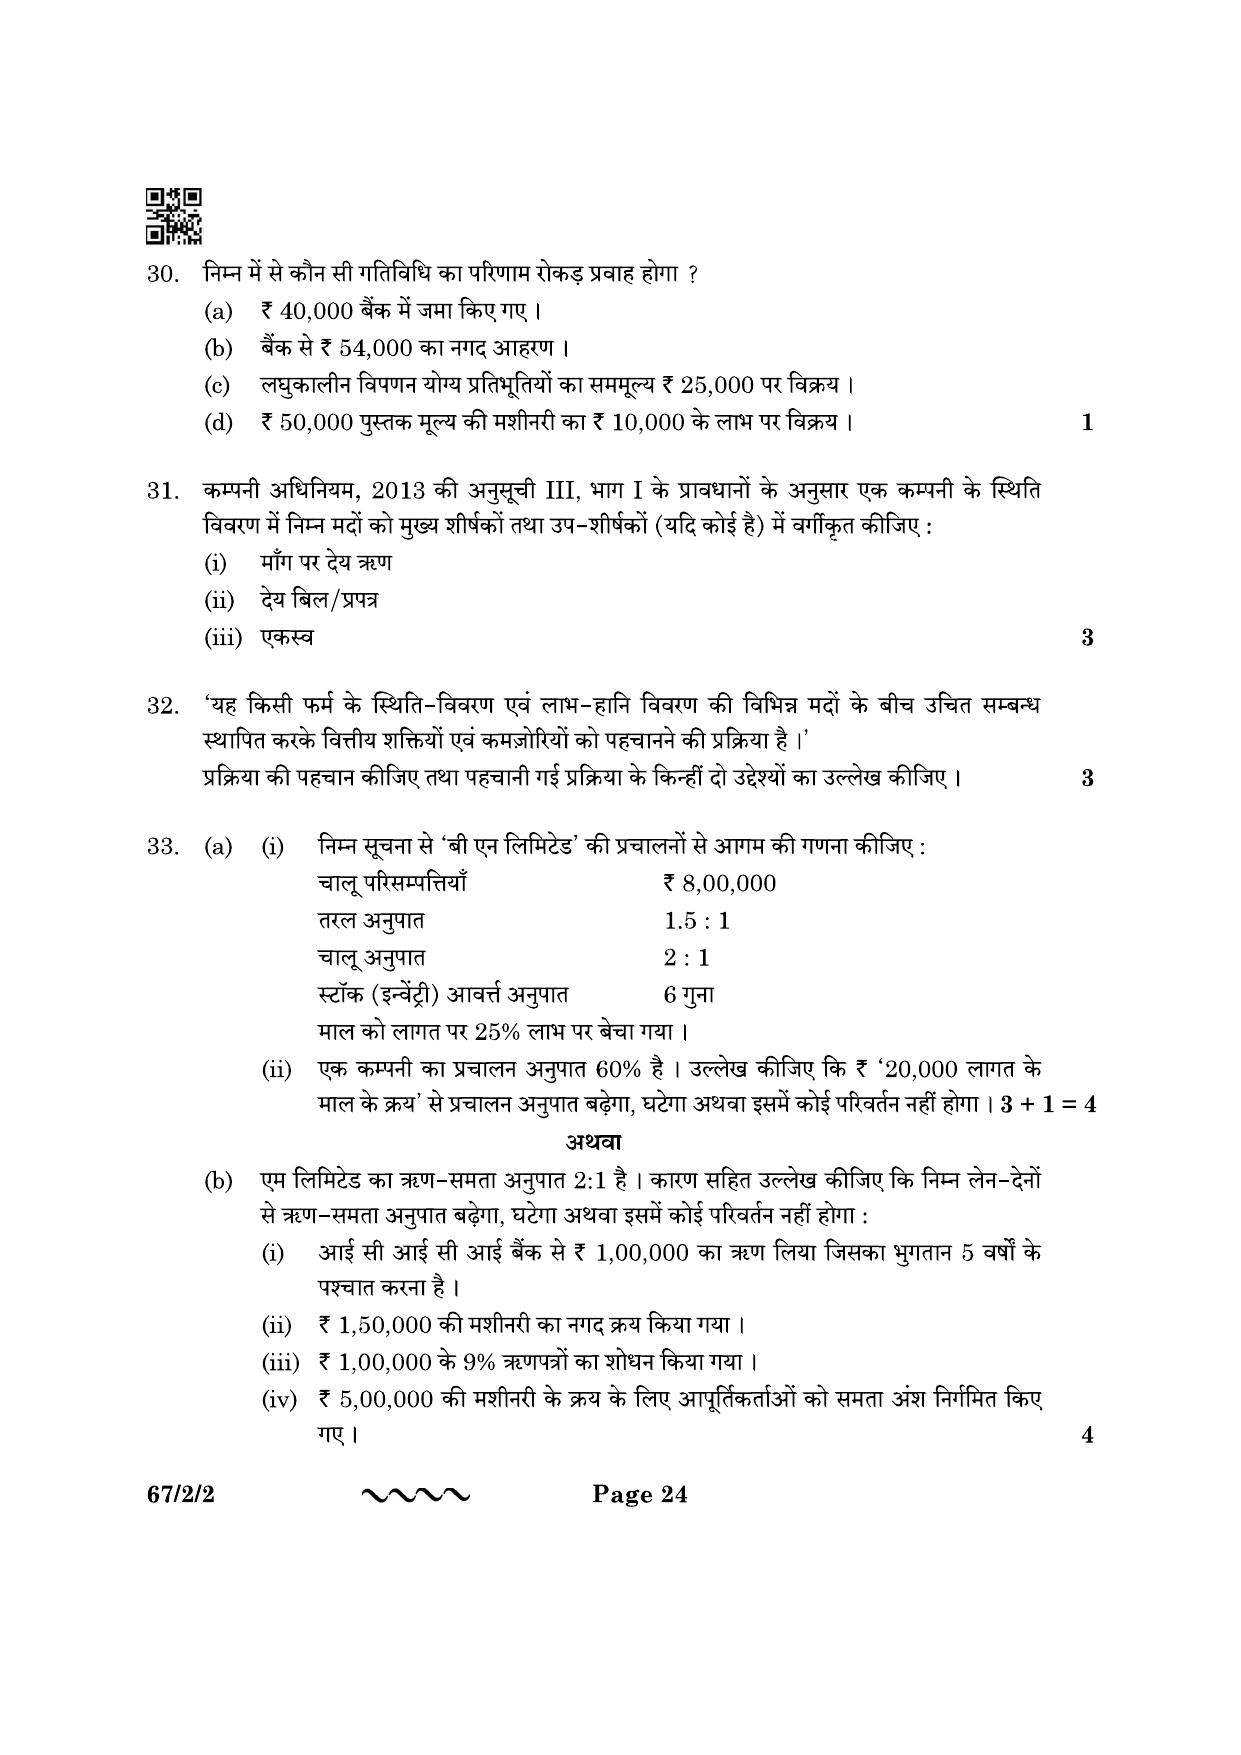 CBSE Class 12 67-2-2 Accountancy 2023 Question Paper - Page 24